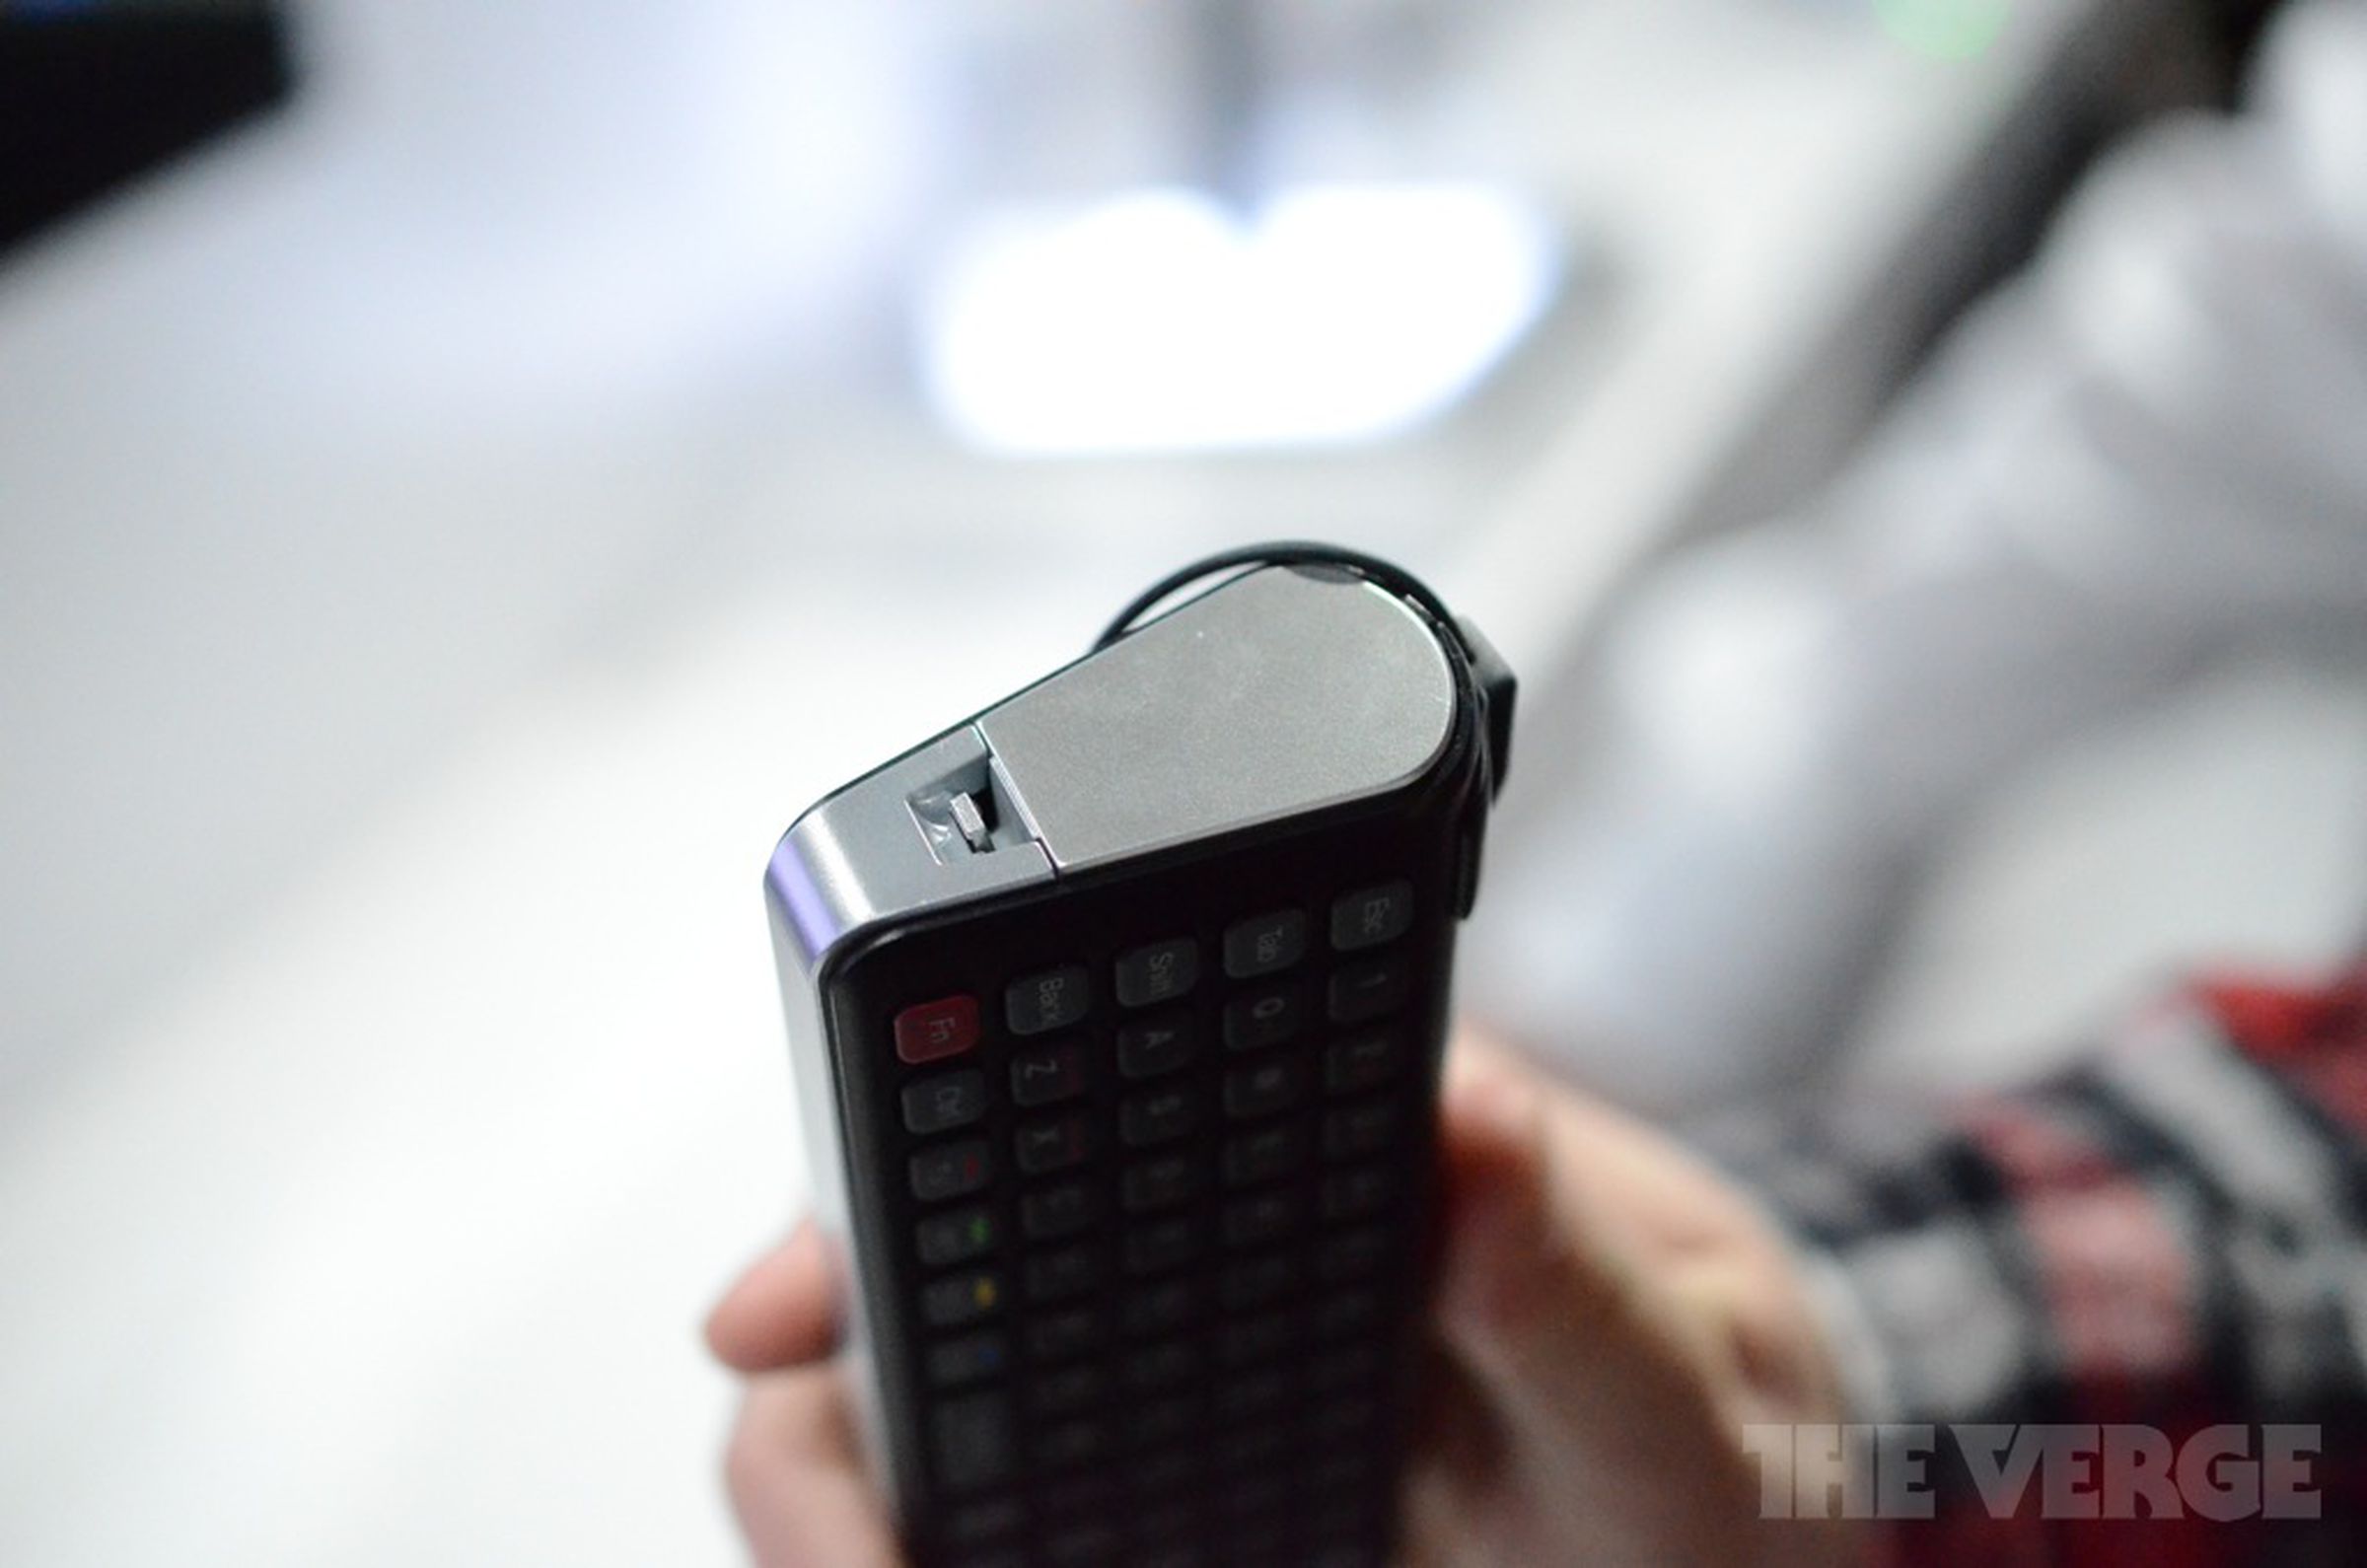 LG's 2013 Magic Remote hands-on